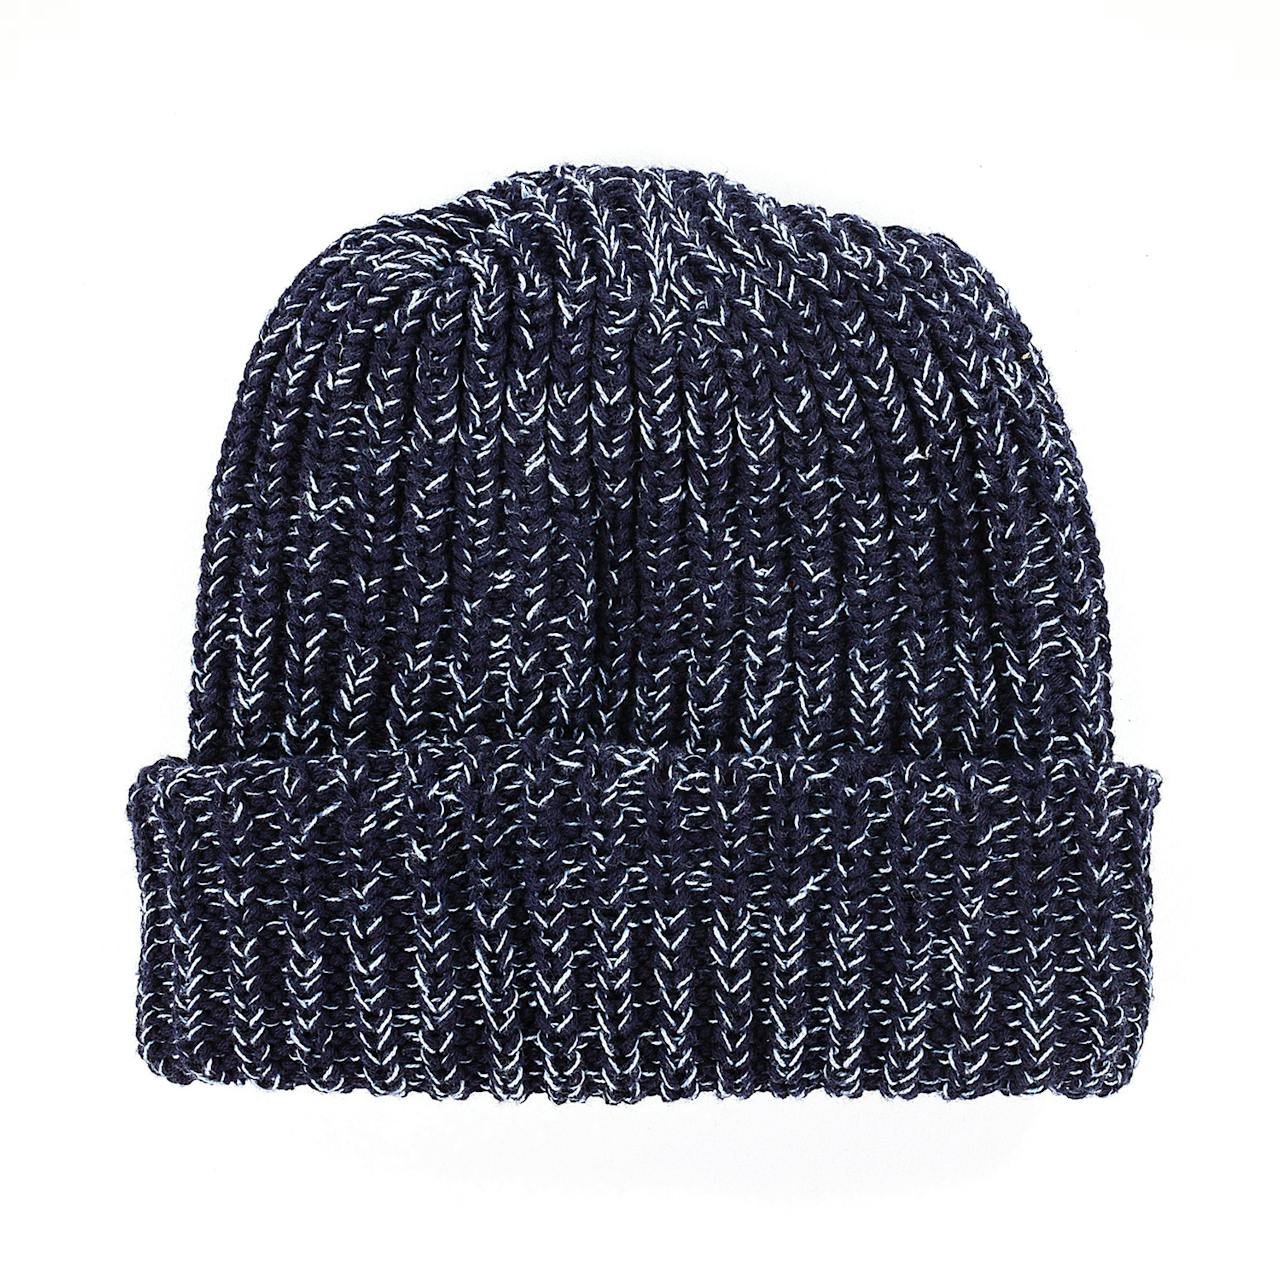 Columbiaknit Marled Knitted Cap